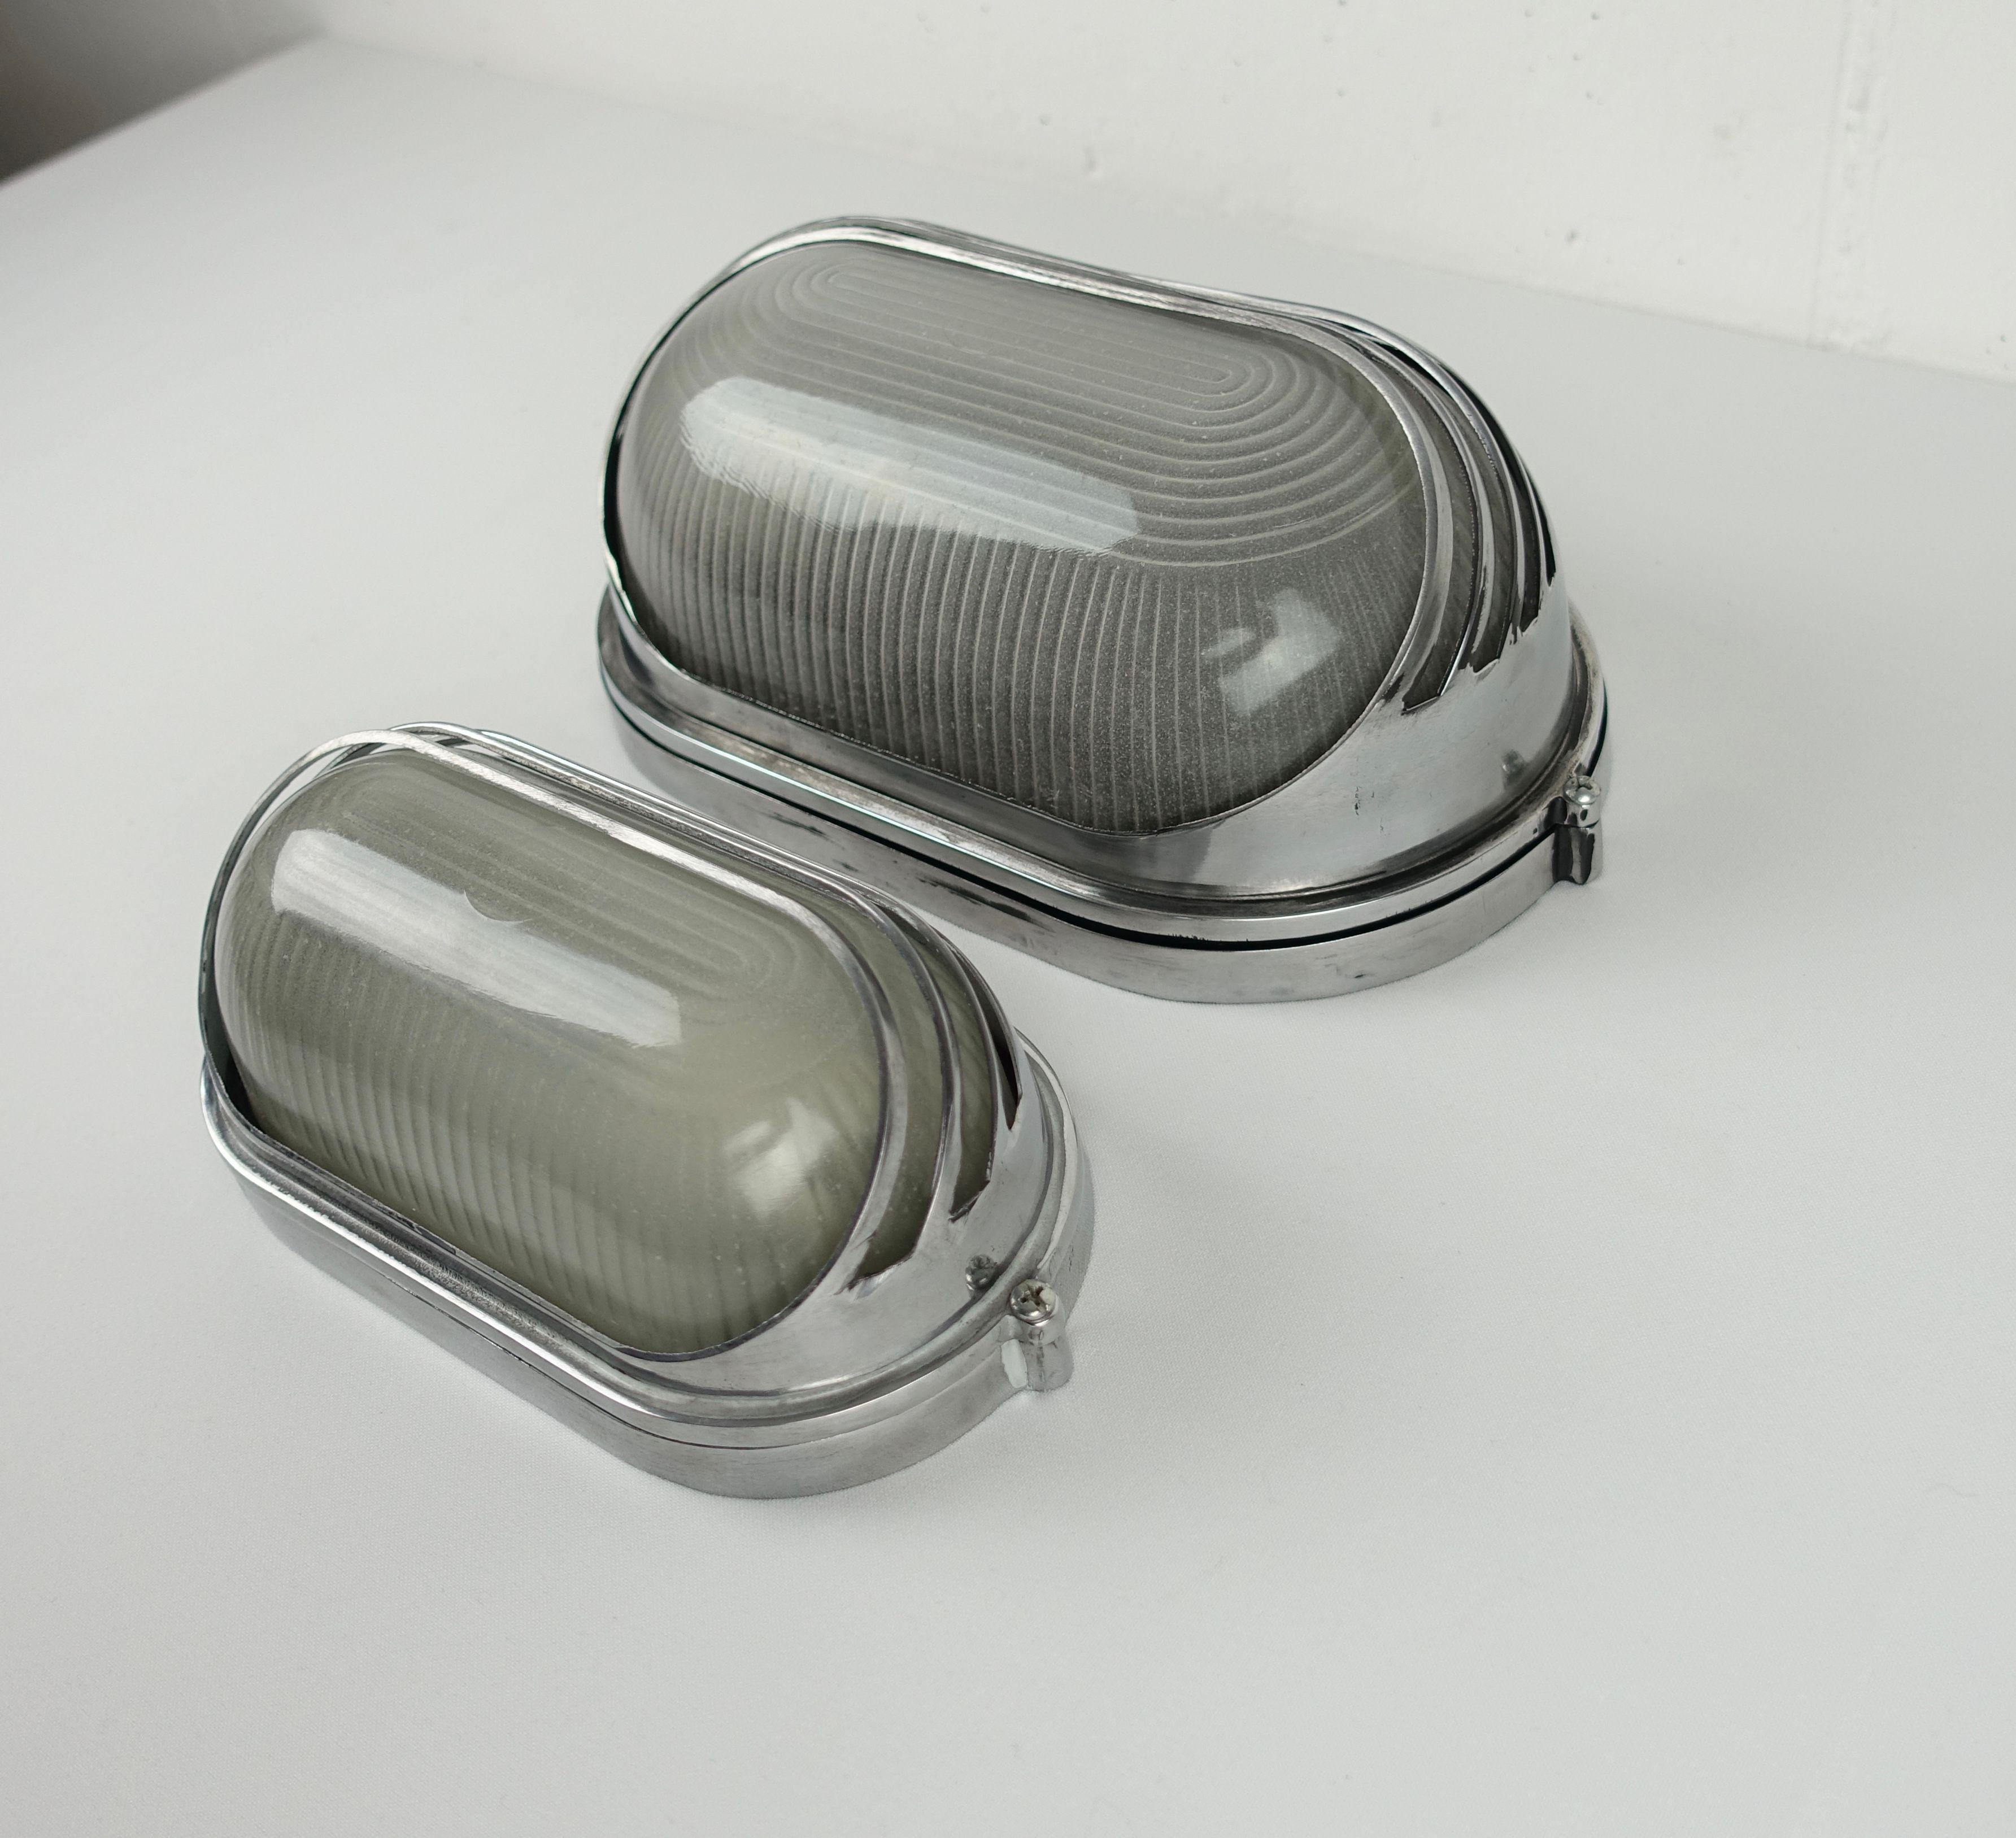 Small Modernist Style Aluminum Wall Lights, Waterproof Lighting In Good Condition For Sale In Crespieres, FR